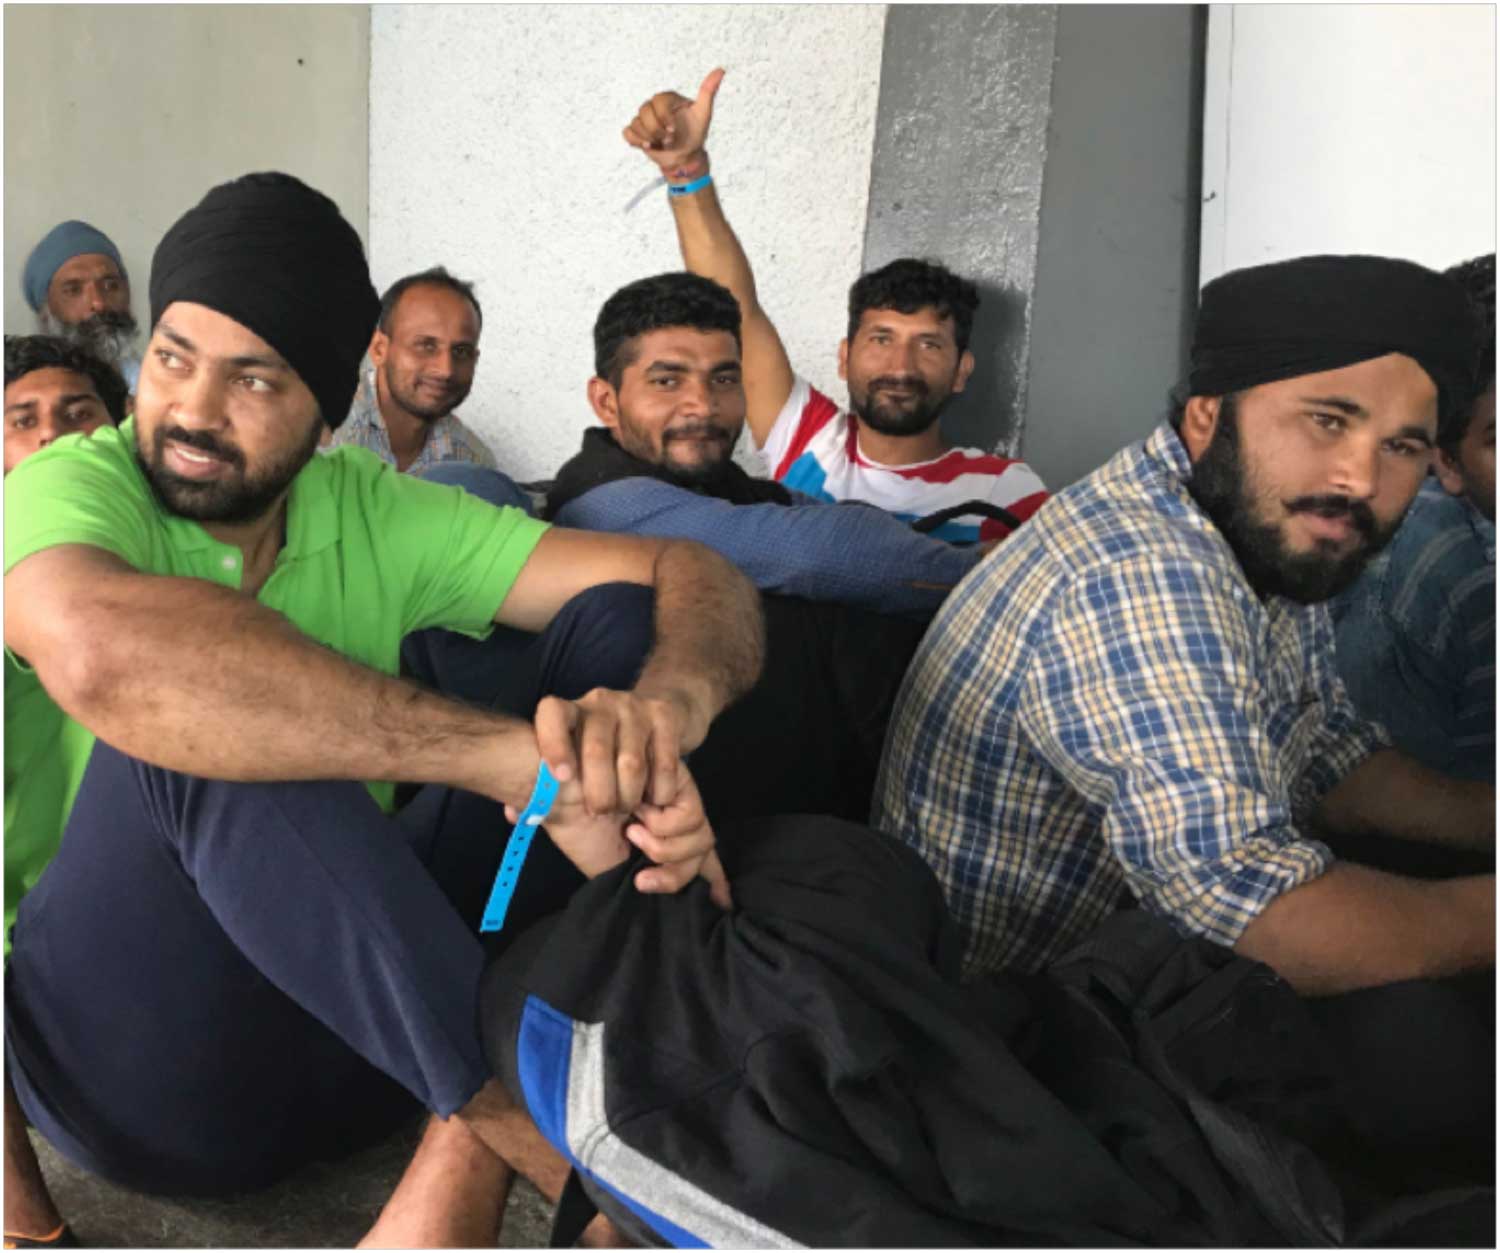 Indian Sikh extracontinentals moving through Costa Rica on their way to the US southern border